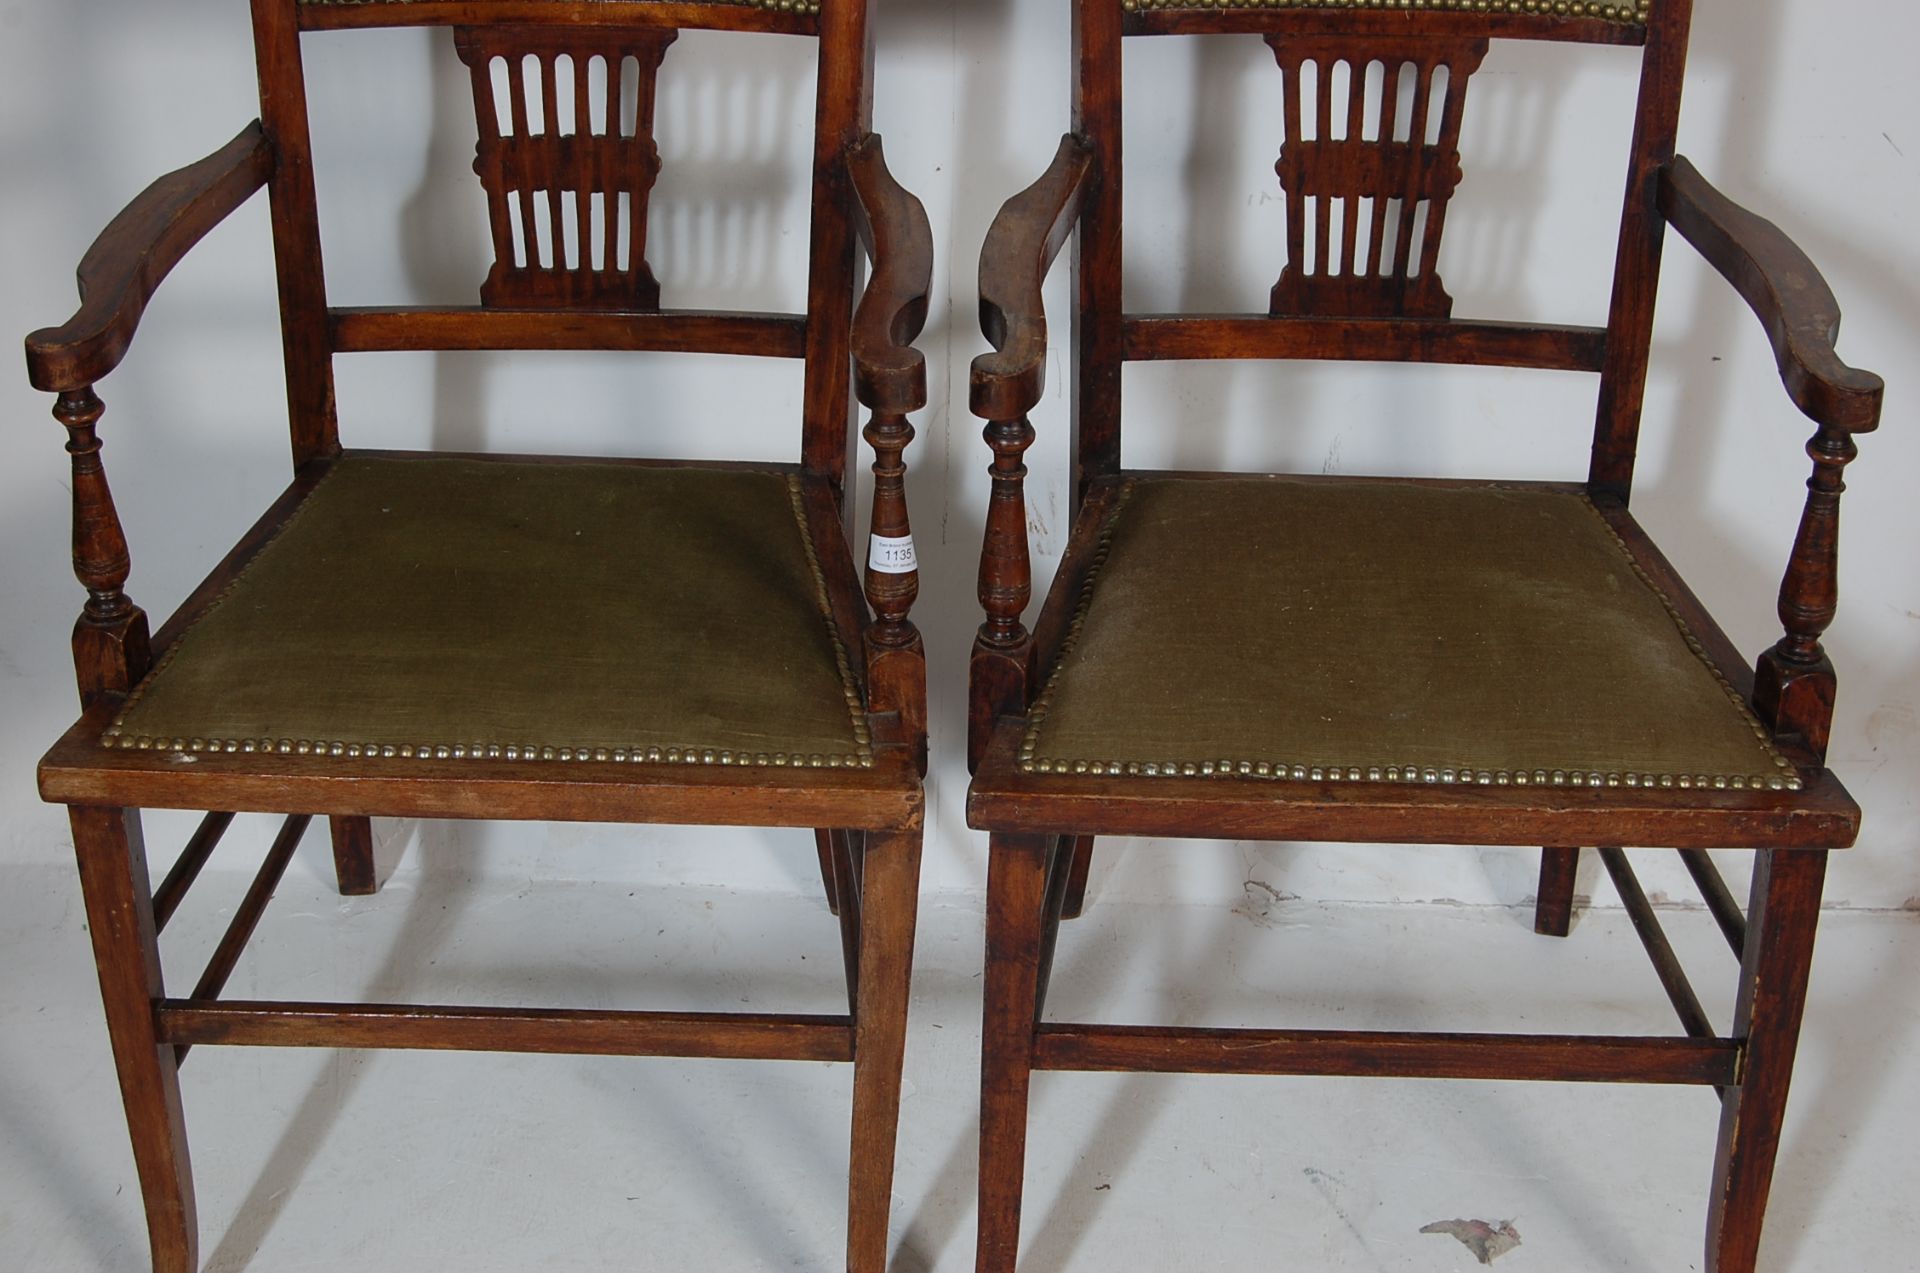 TWO 19TH CENTURY LATE VICTORIAN BEDROOM CHAIRS - Image 3 of 5